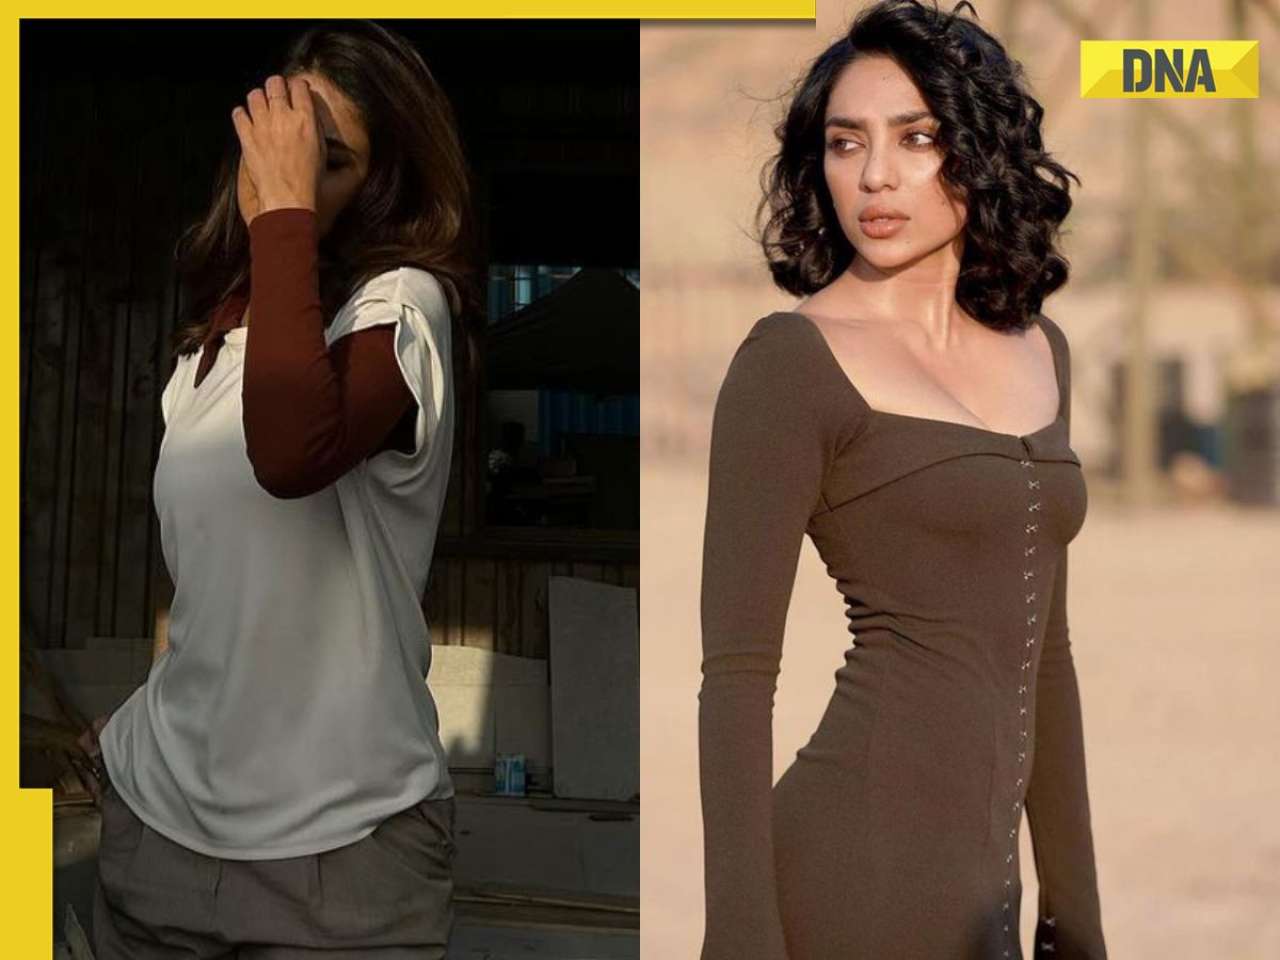 This TV star was rejected for Sobhita Dhulipala's role in The Night Manager, failed audition